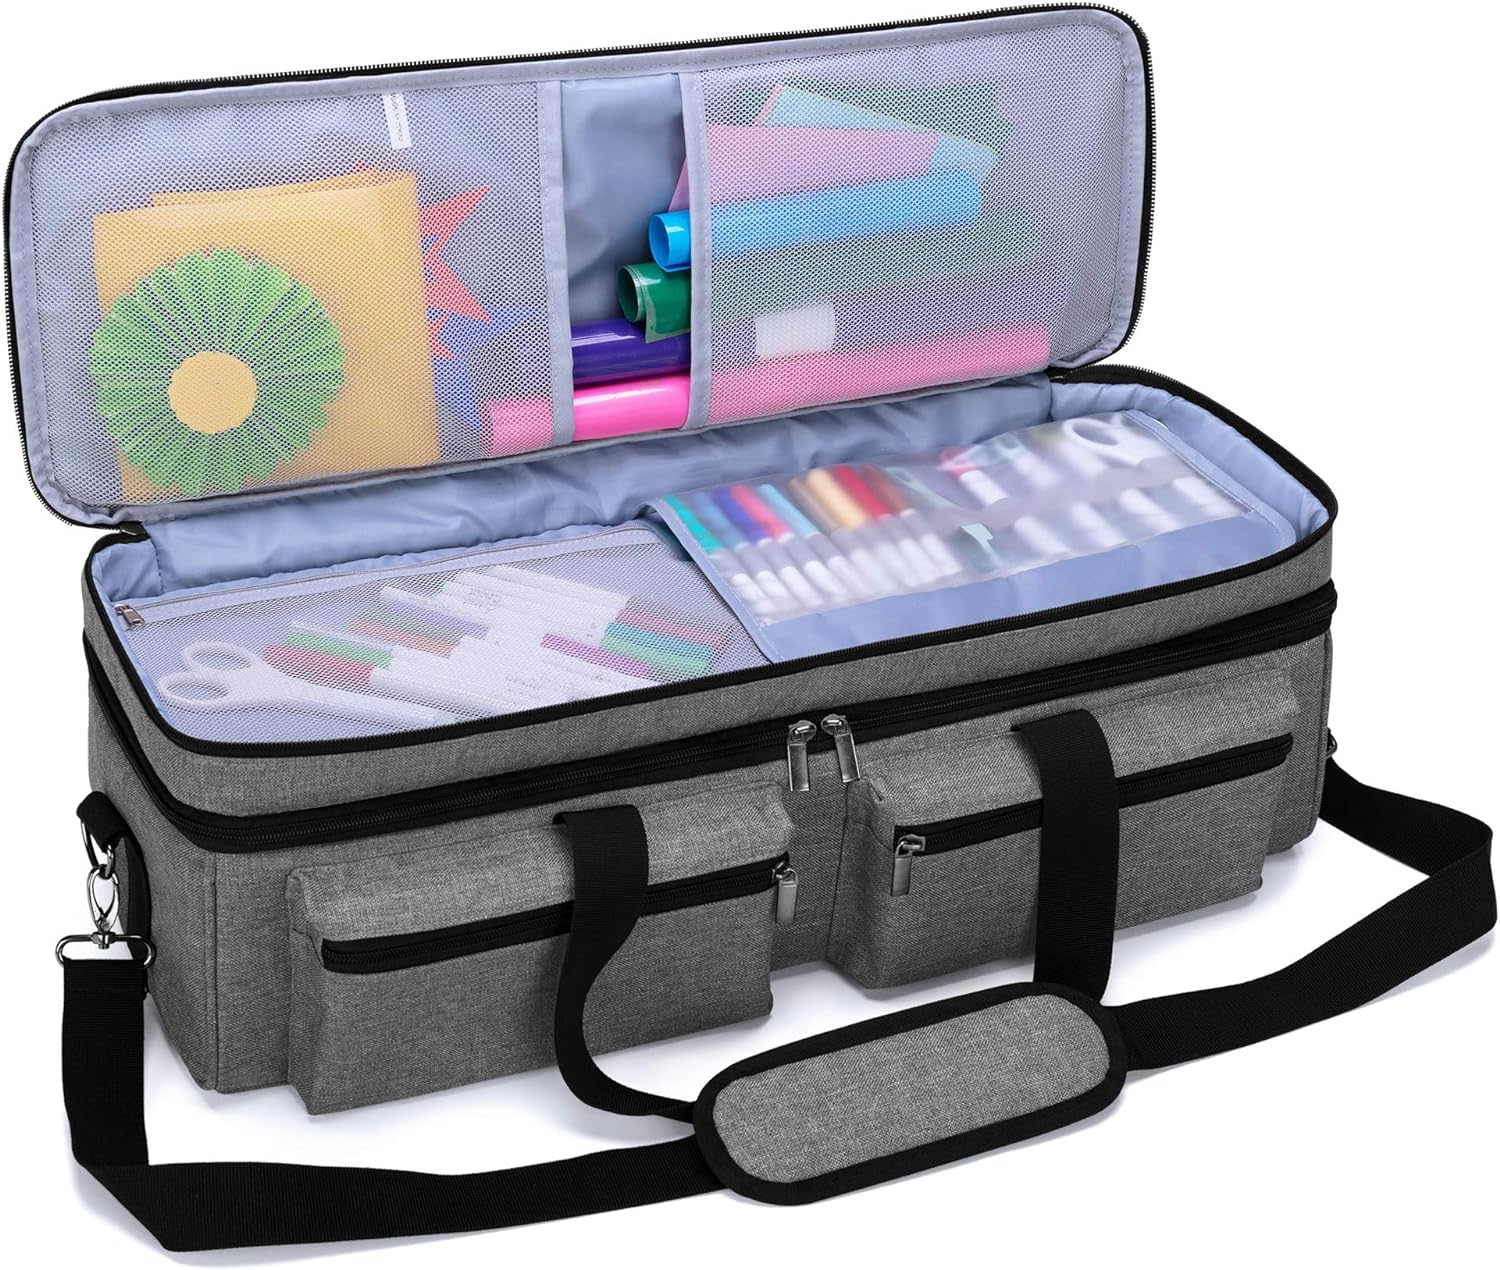 LUXJA Double-layer Bag Compatible with Cricut Explore Air (Air2) and Maker, Carrying Bag Compatible with Cricut Die-Cut Machine and Supplies (Bag Only, Patent Design), Gray